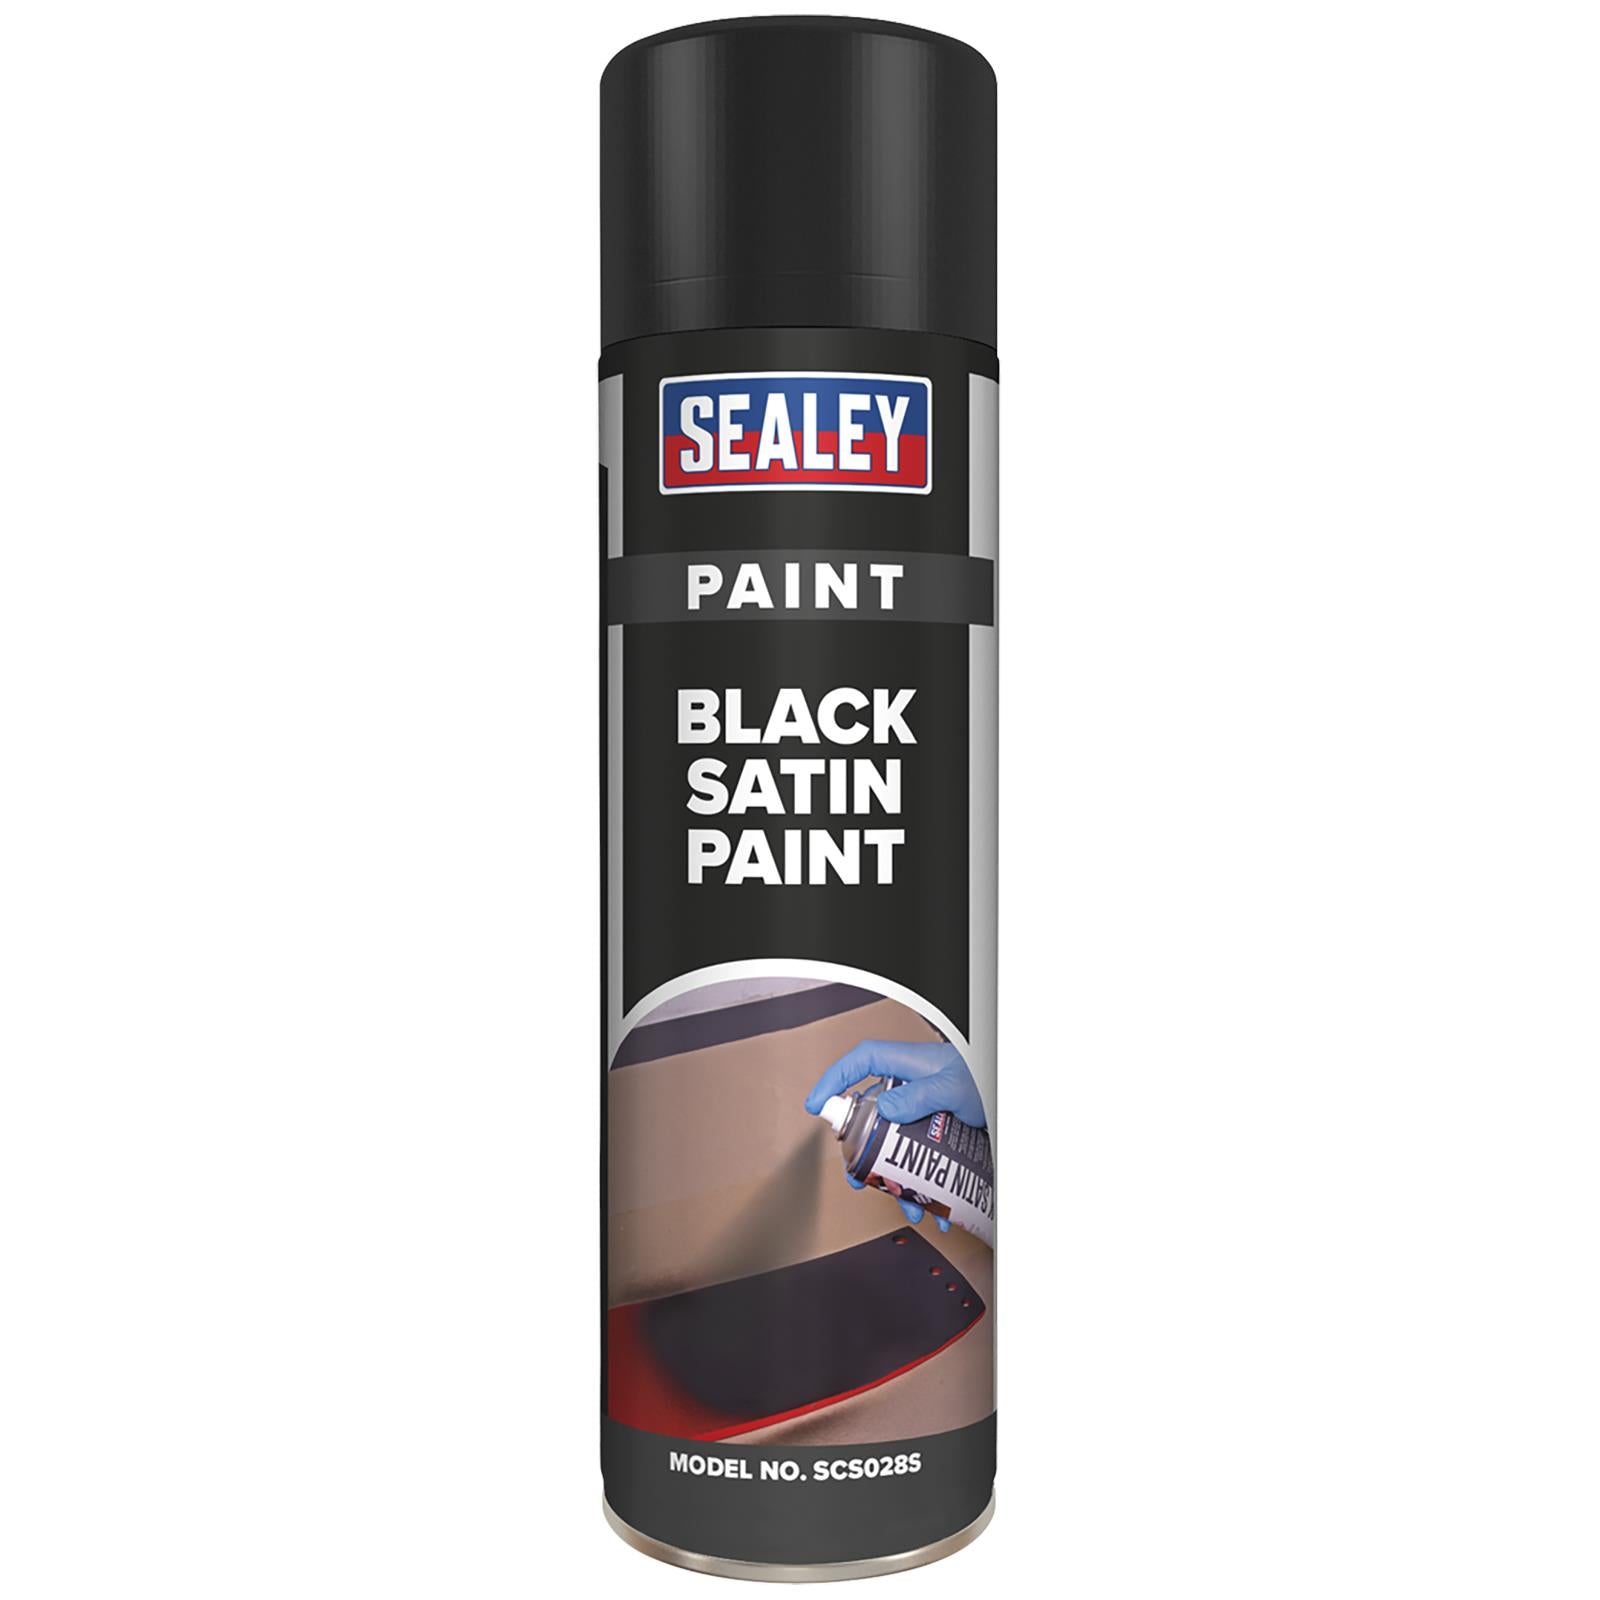 Sealey Black Satin Spray Paint 500ml for Metal Wood Plastic Fast Drying